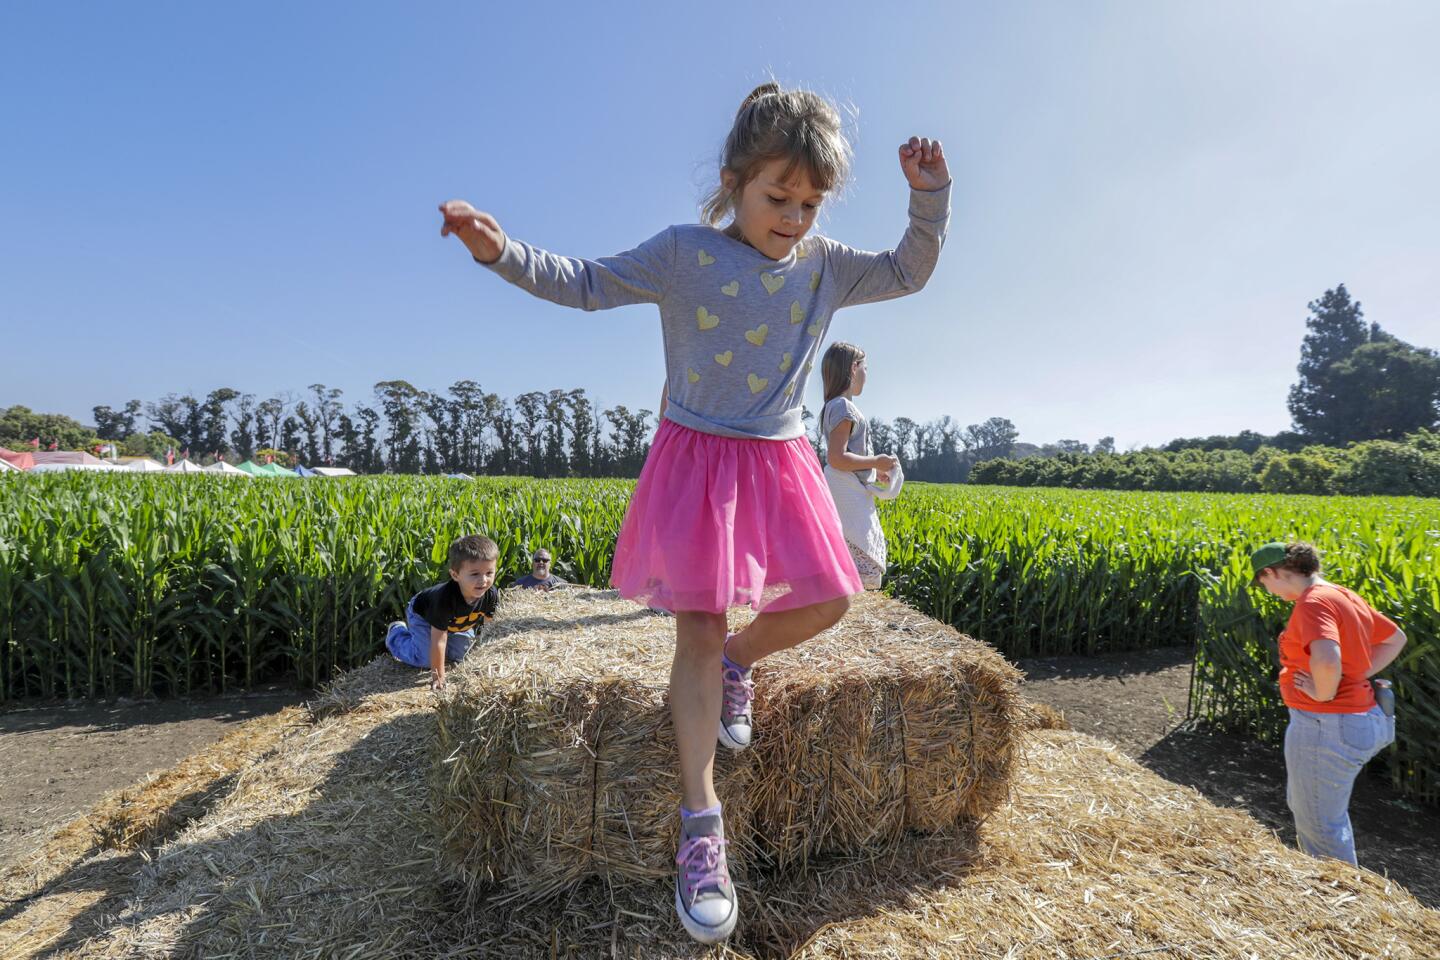 Riece Dinse, 6, plays on hay bales stacked to provide a higher vantage point of a complex maze of corn stalks at Underwood Family Farms in Moorpark.